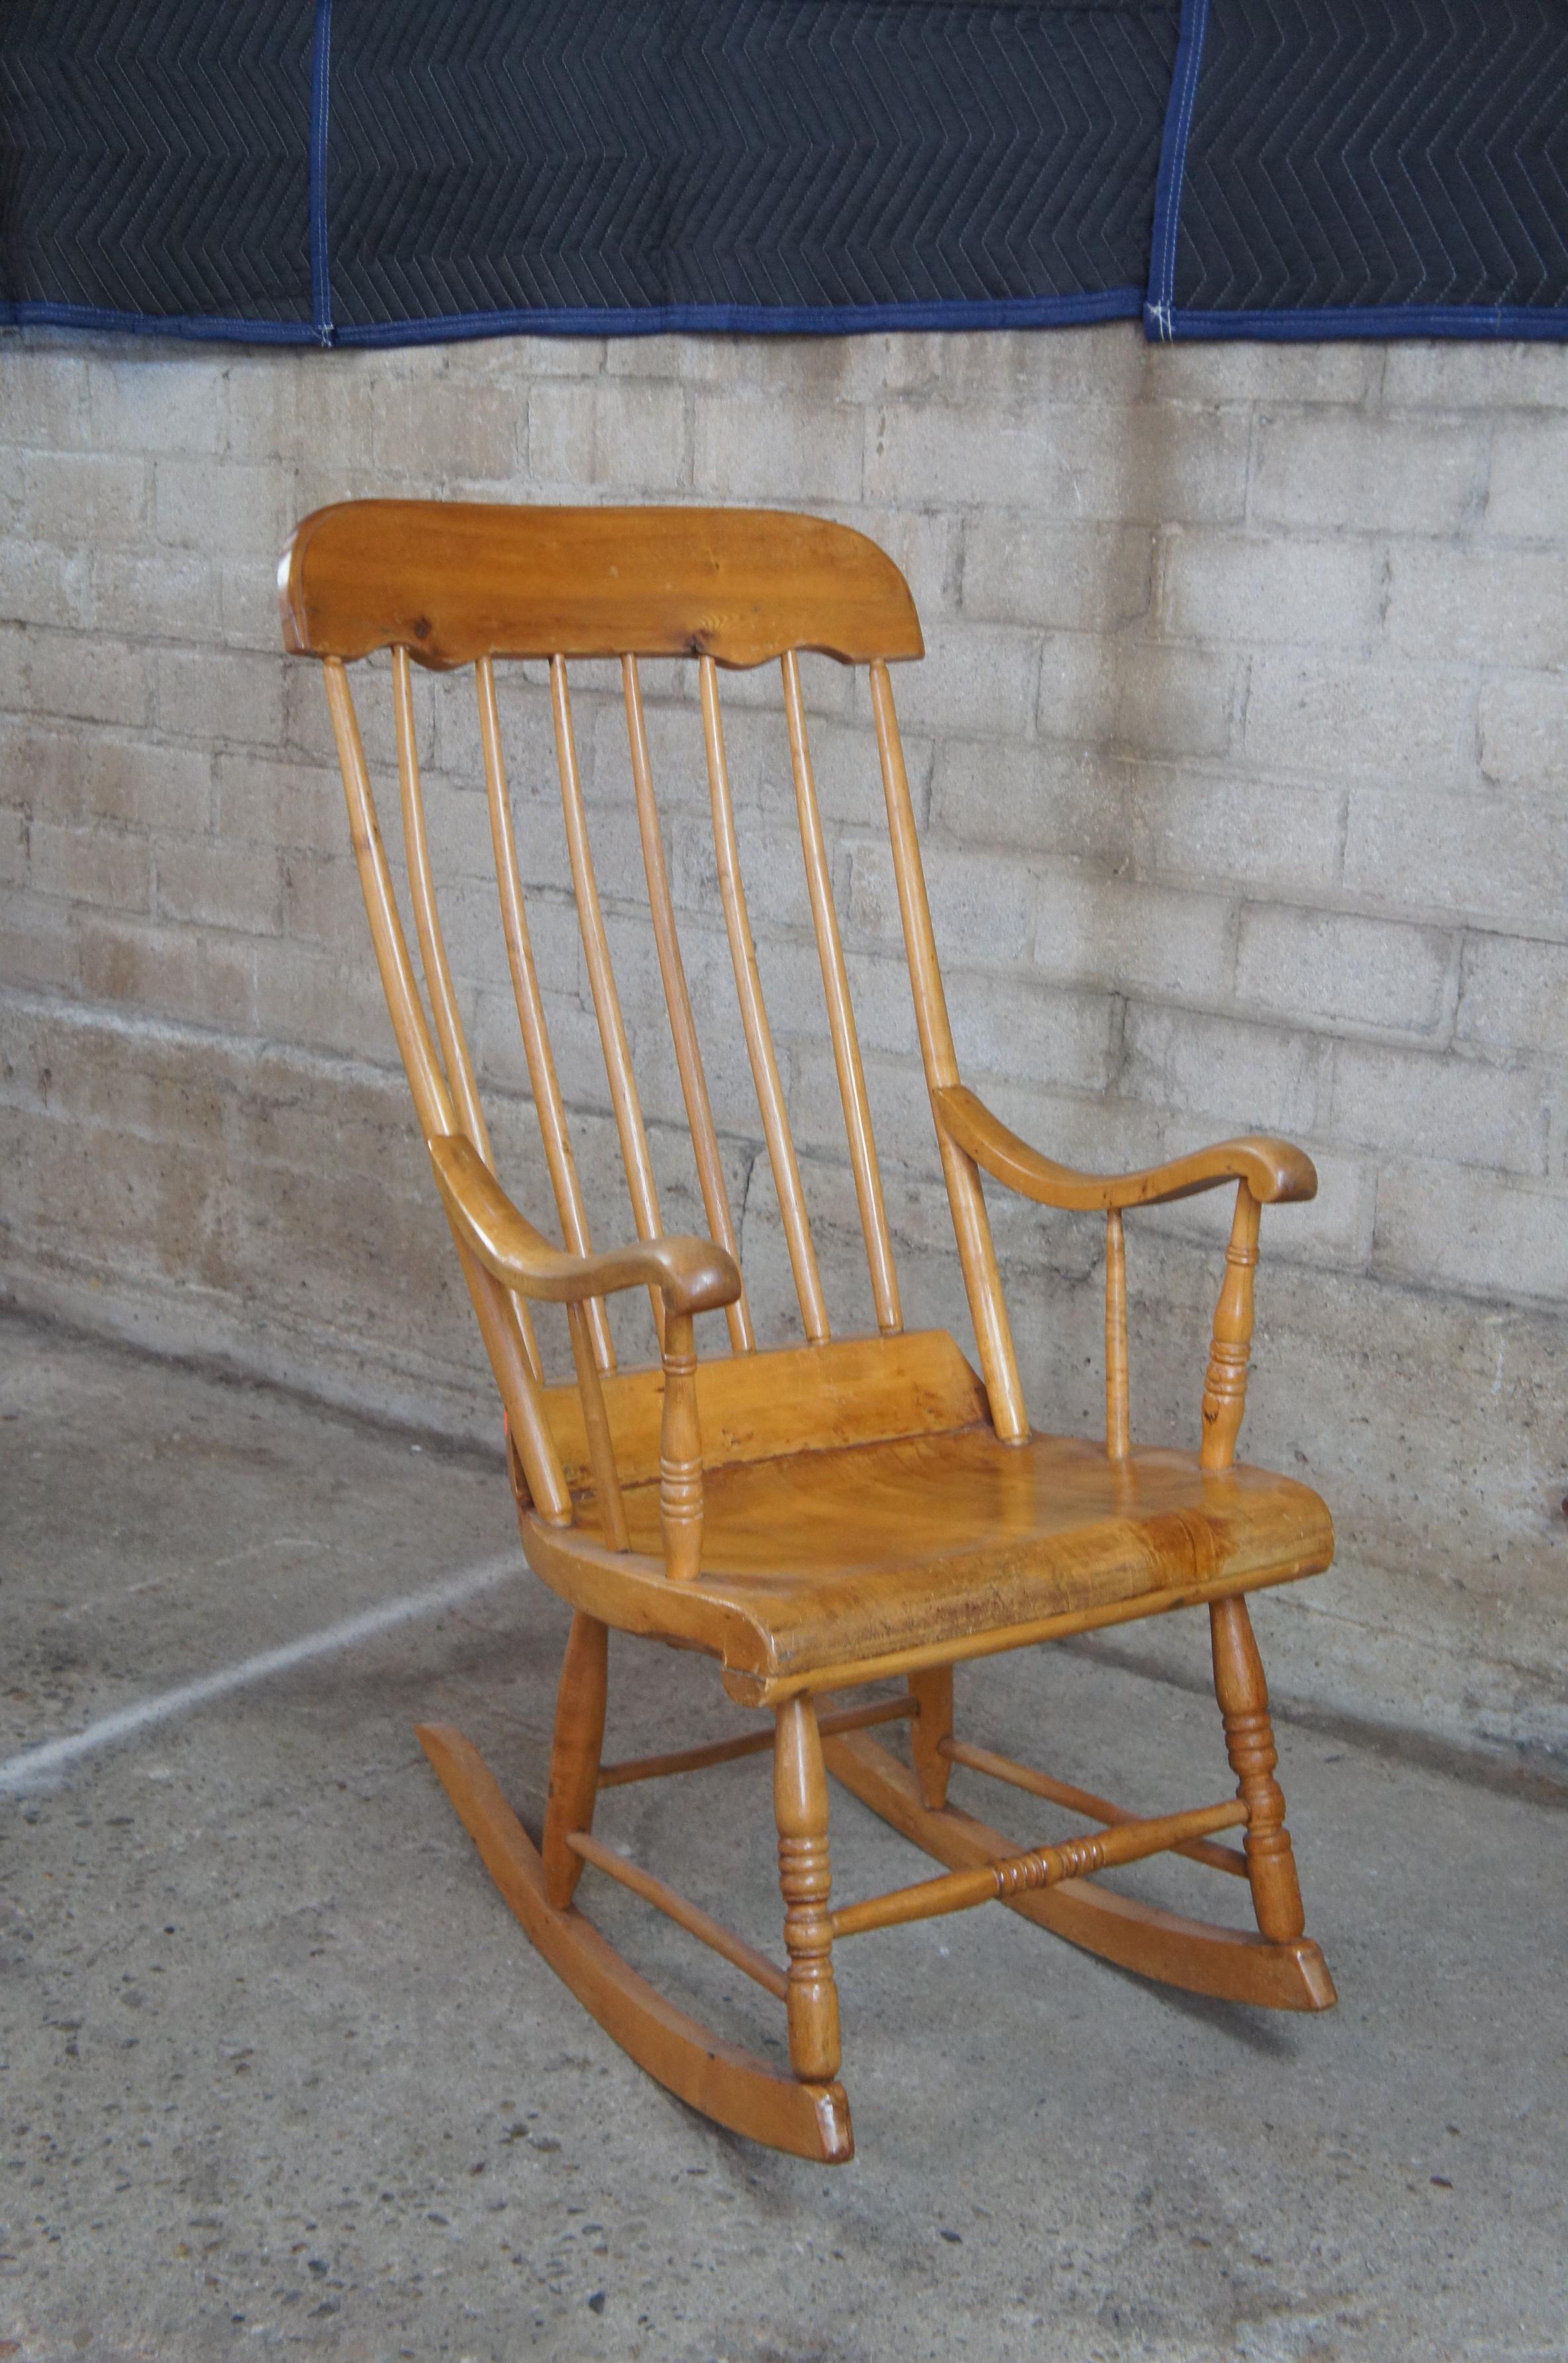 American Colonial Antique Early American Country Farmhouse Pine Spindle Back Rocking Chair